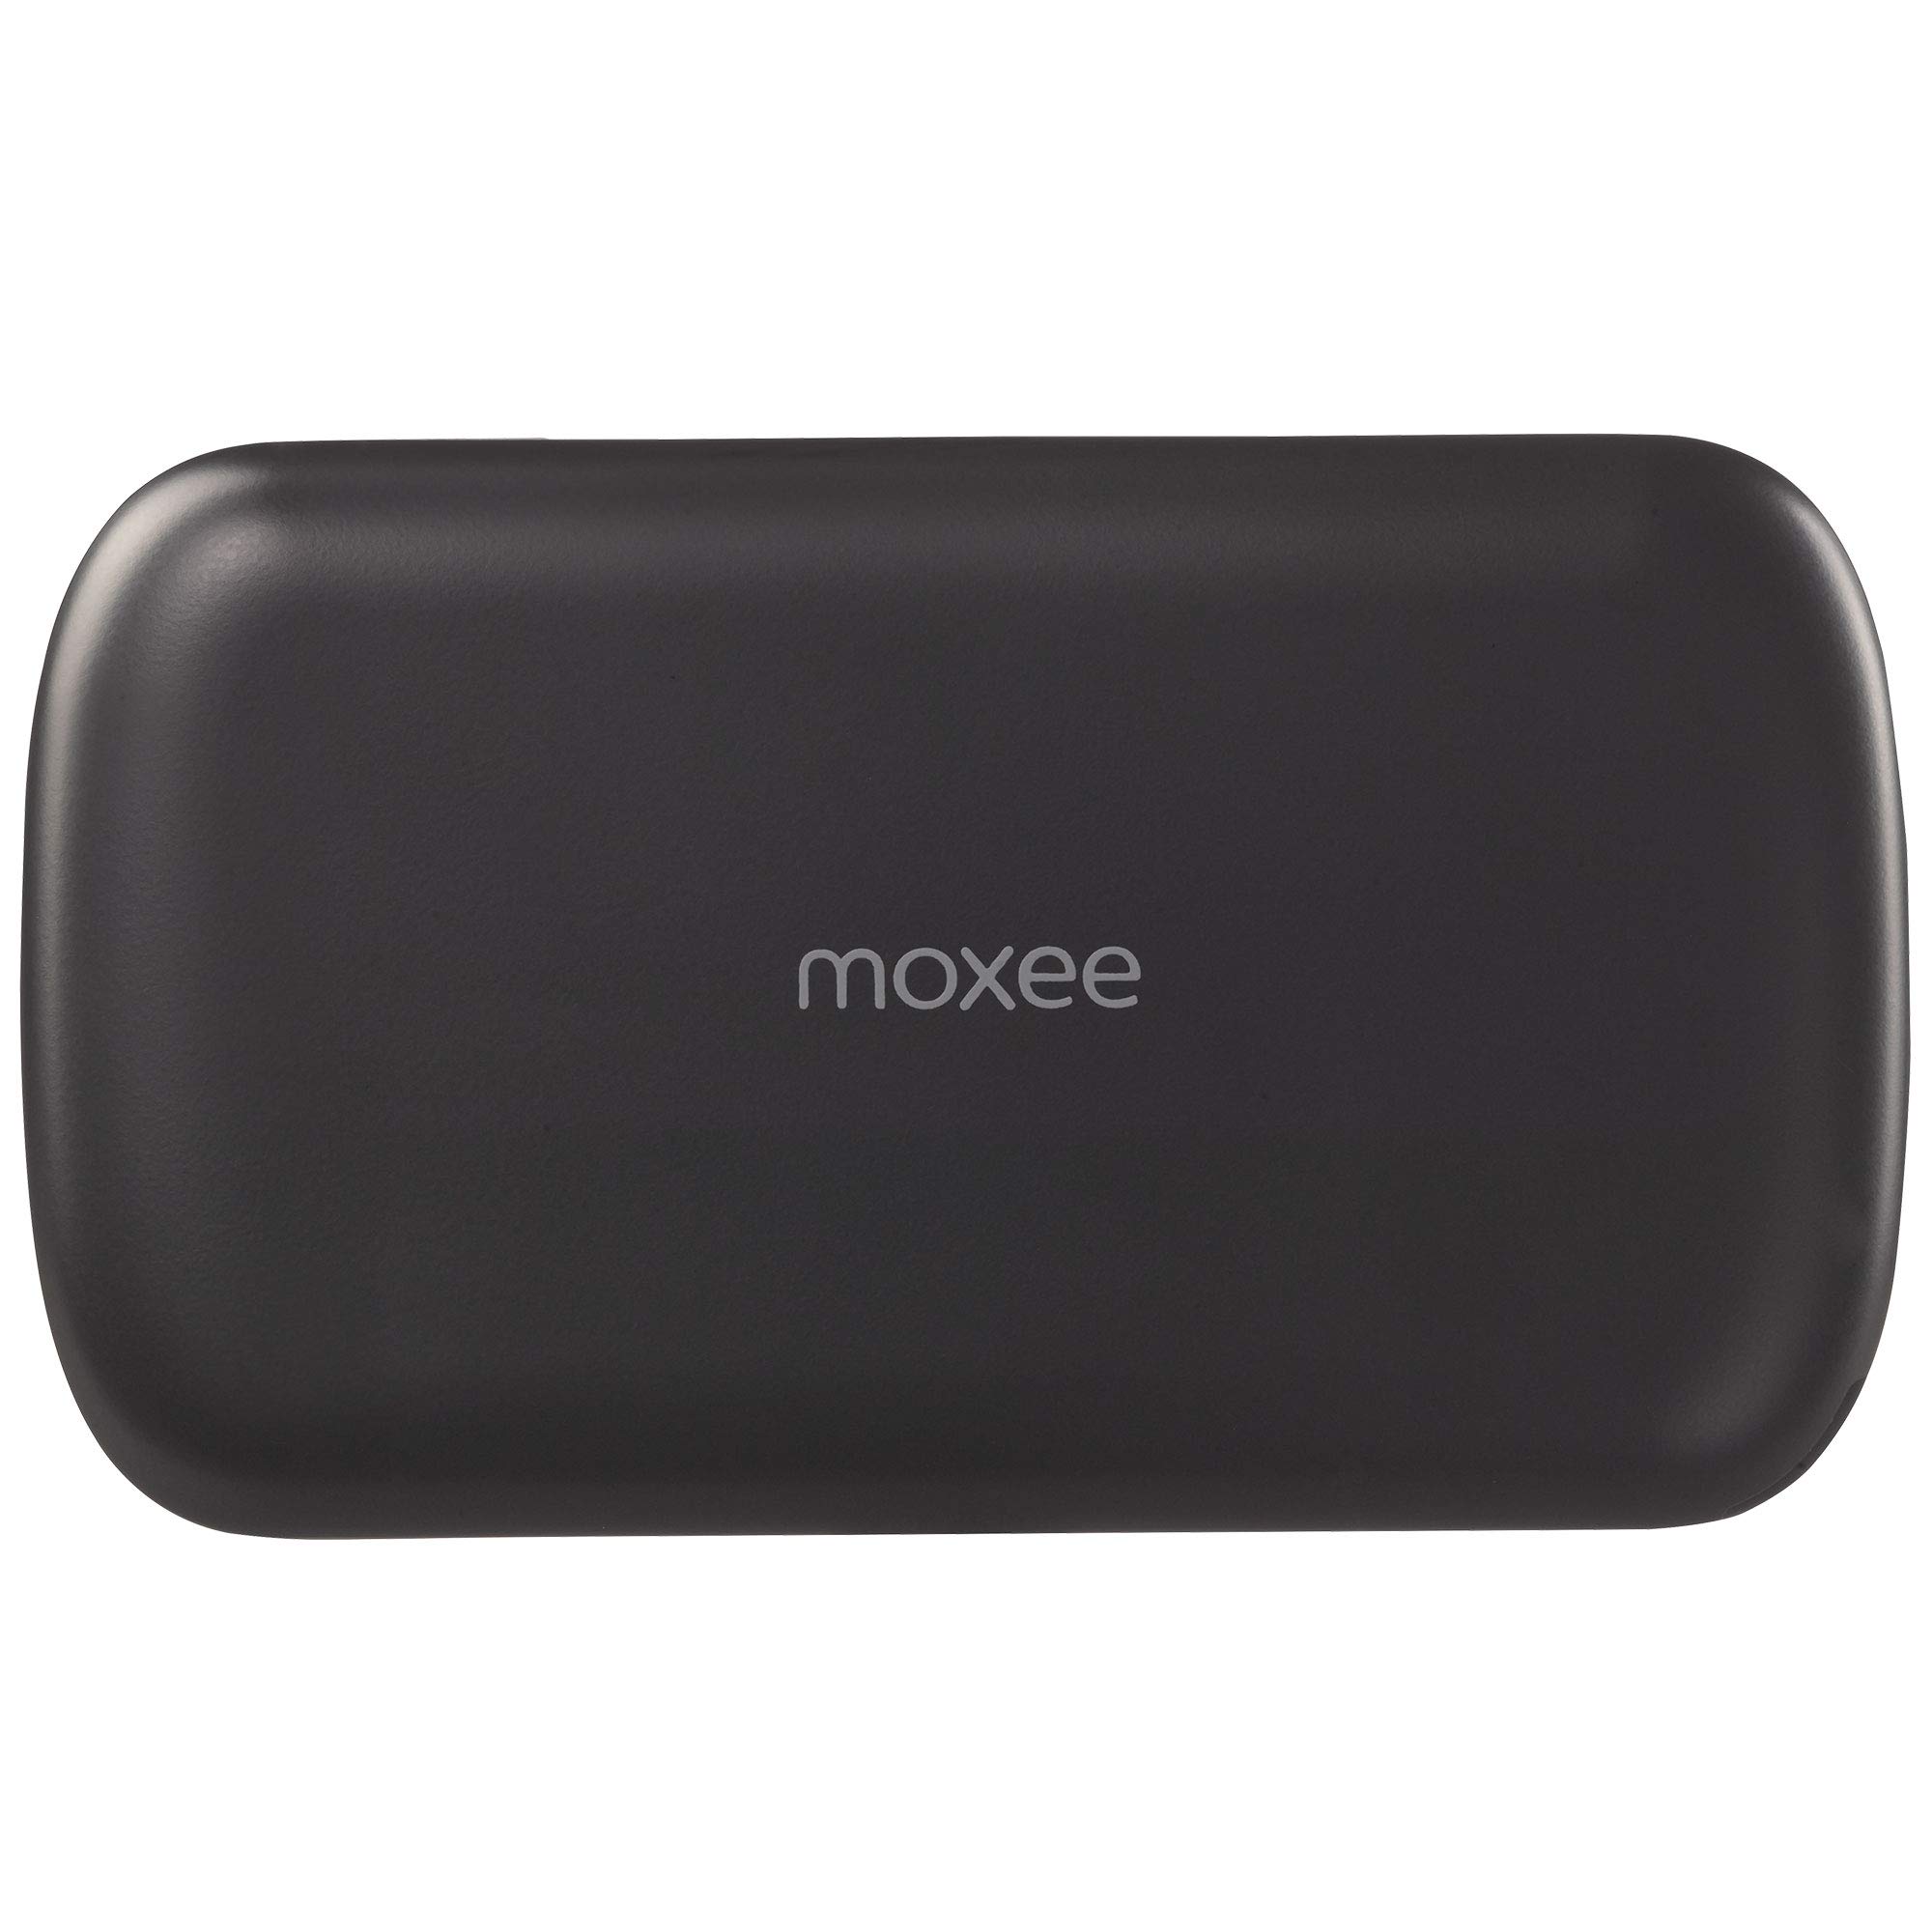 SIMPLE Mobile Moxee, 4G LTE, 256MB, Sim Card Included, Black - Prepaid Mobile Hotspot (Locked) -